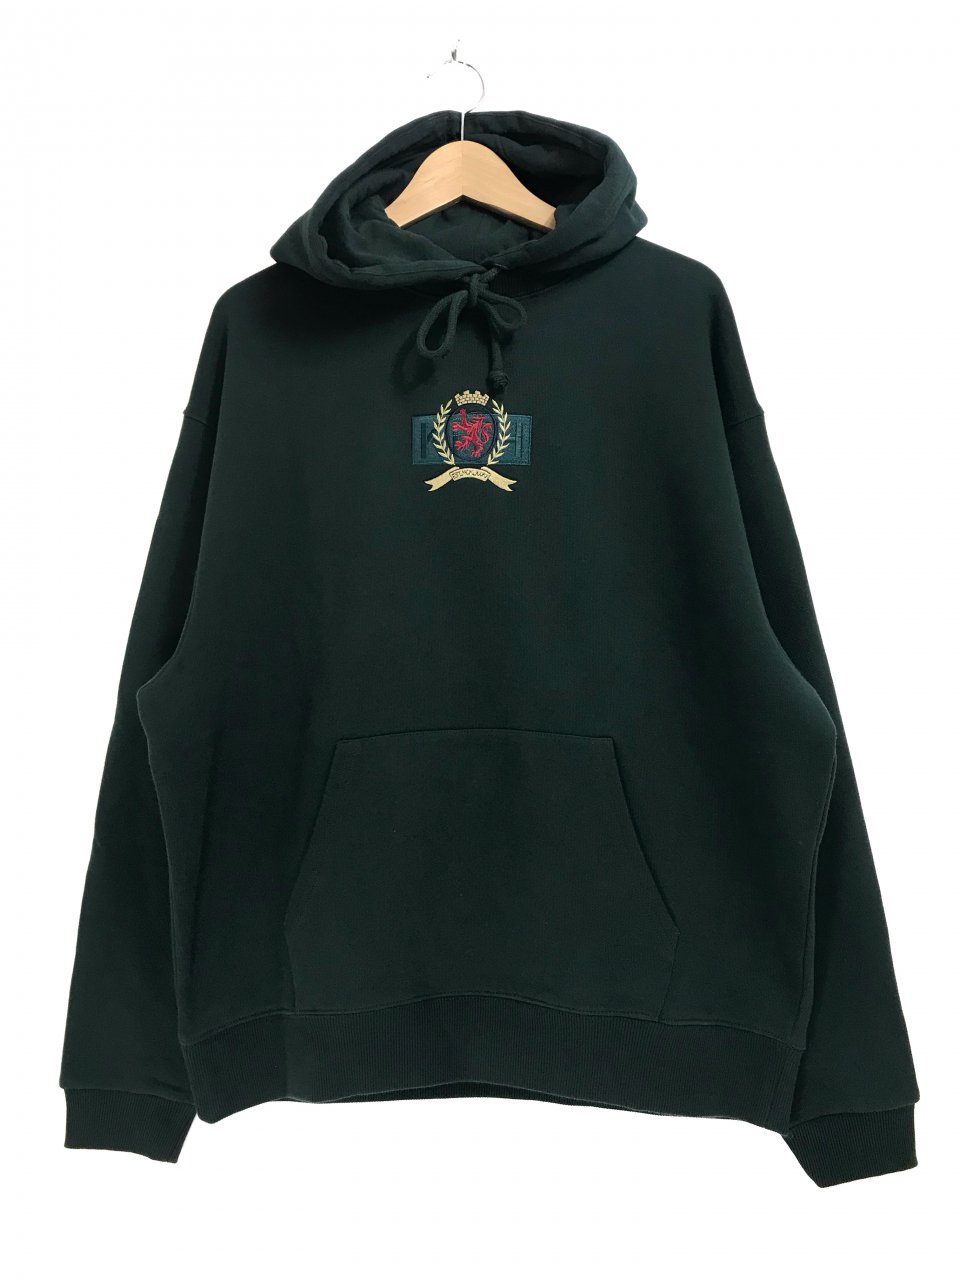 KITH × TOMMY HILFIGER CREST HOODIE (FOREST) キース キス トミー